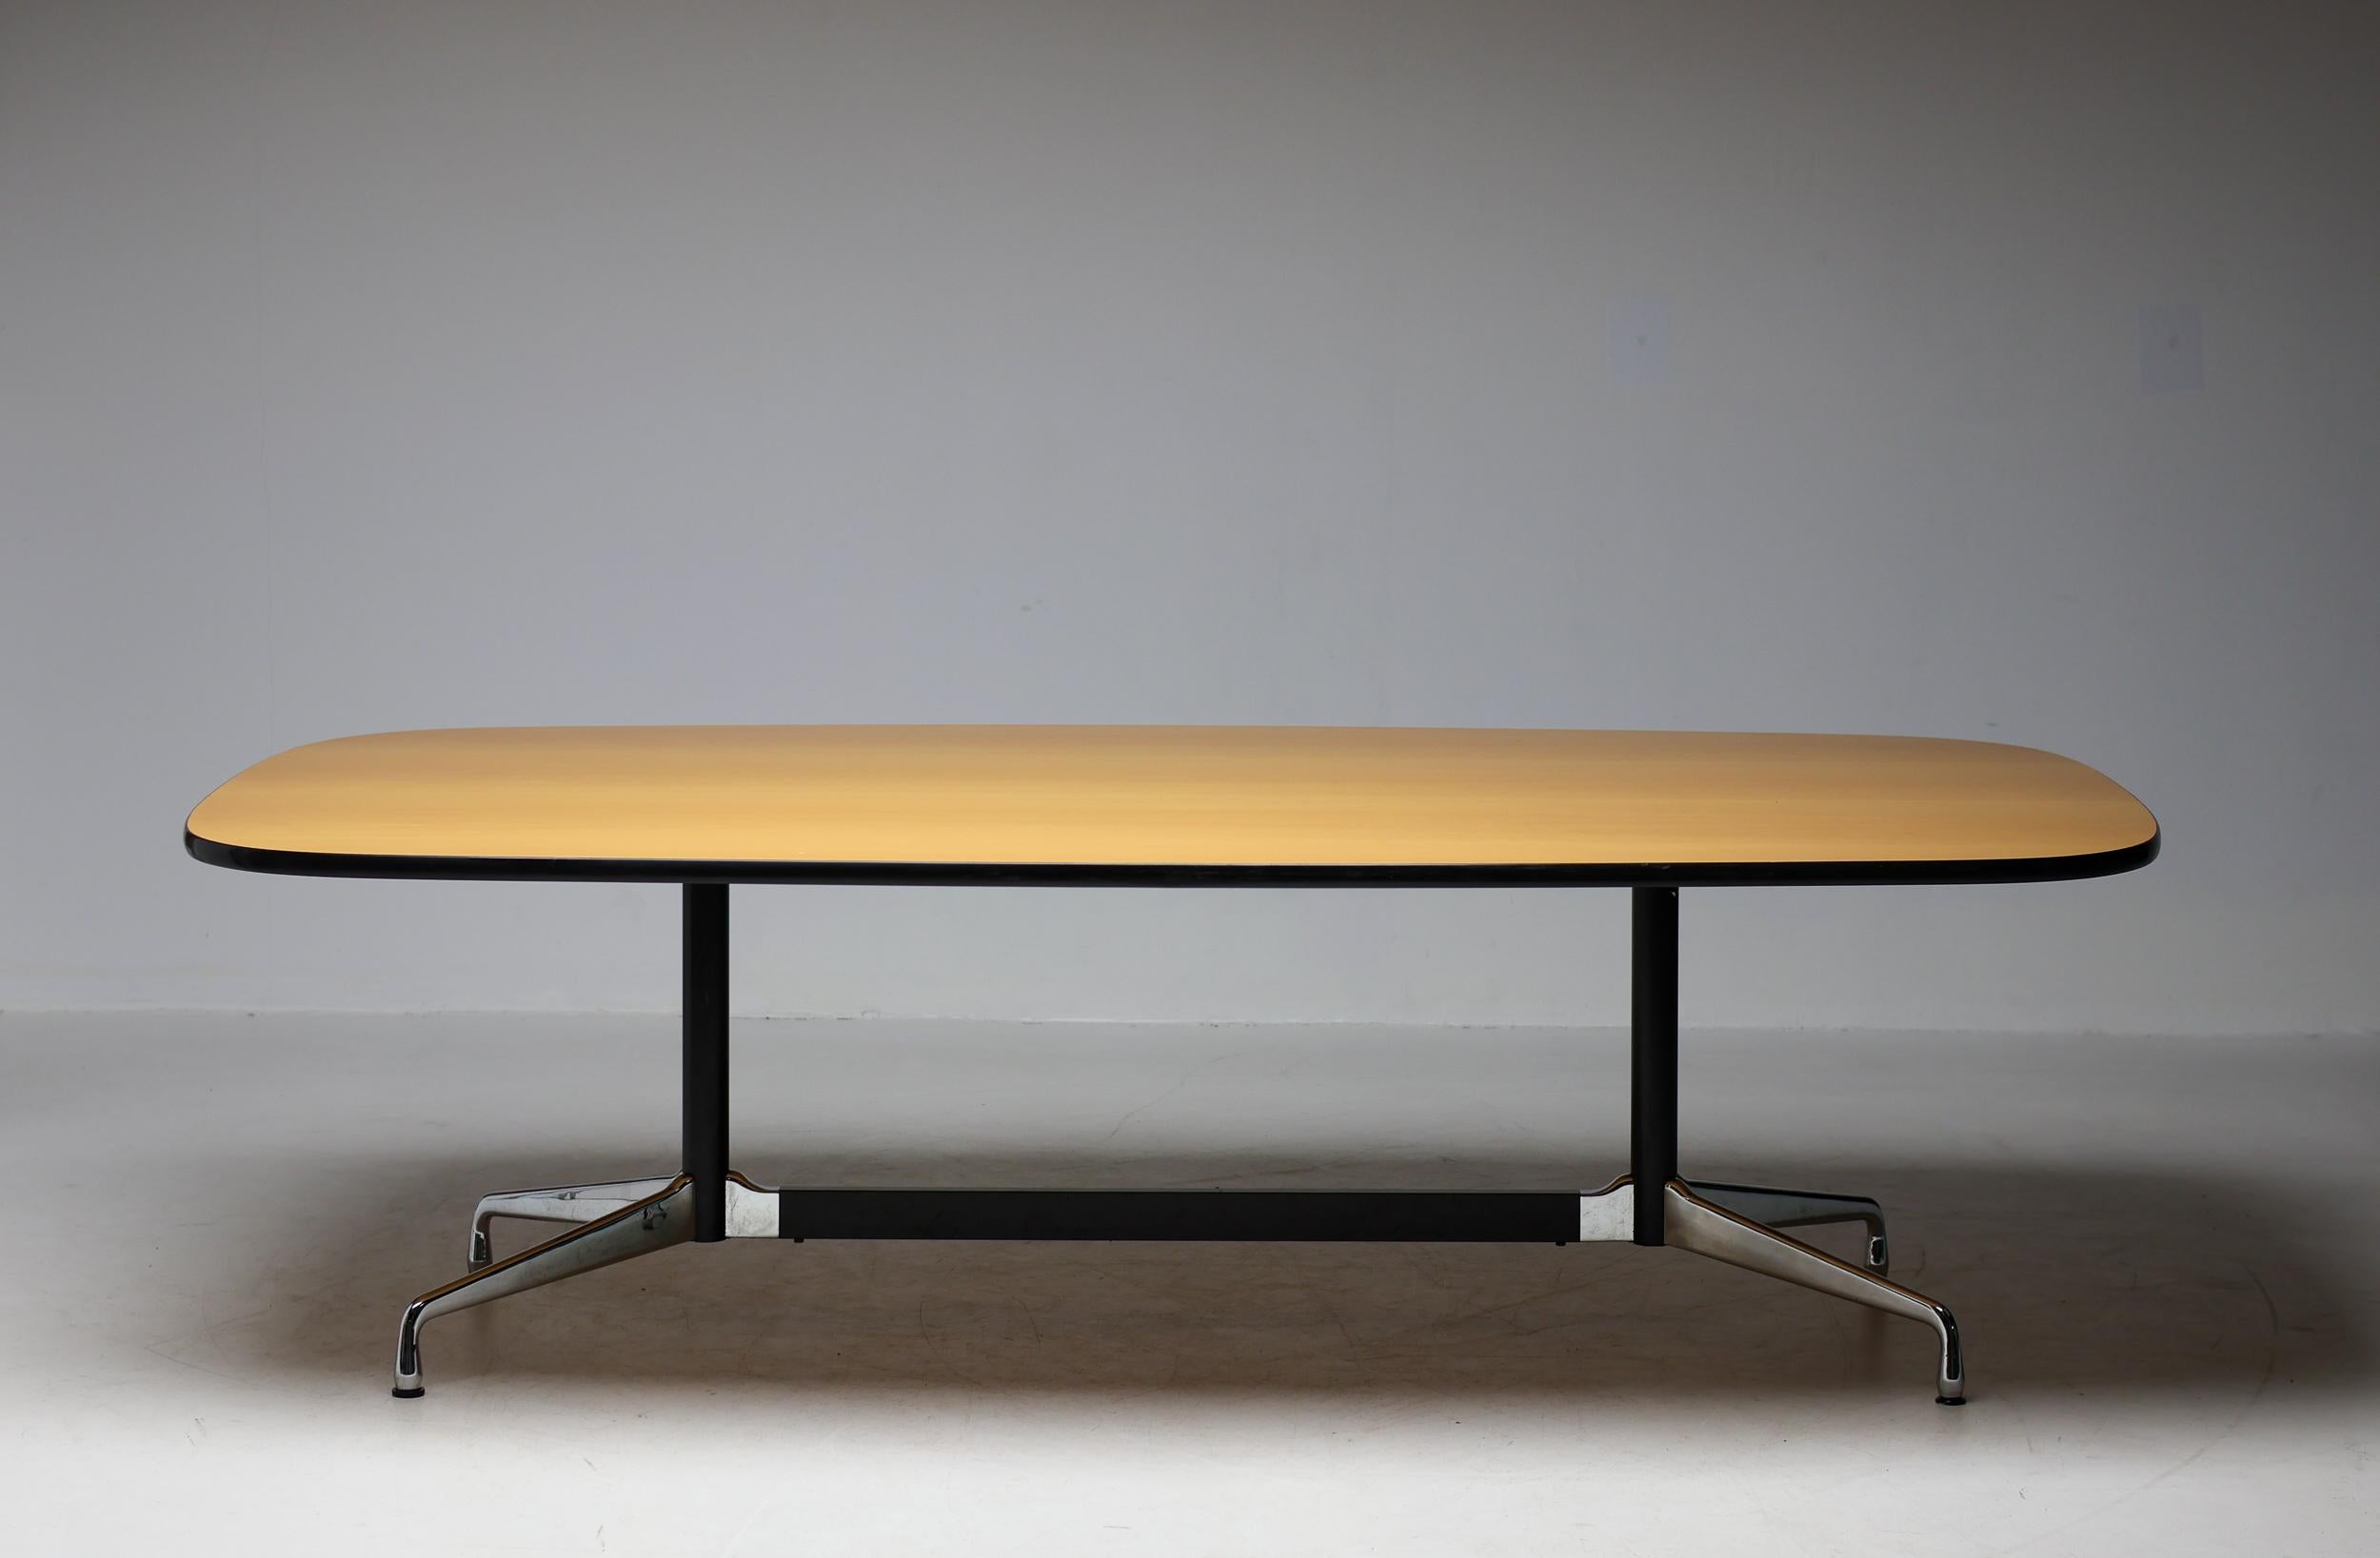 Large Charles & Ray Eames Segmented Base conference table made by Vitra in 2001.
Beautiful beech book matched veneer one piece tabletop, marked with production date label.
The base marked with a Vitra label as shown.
Very carefully used, in